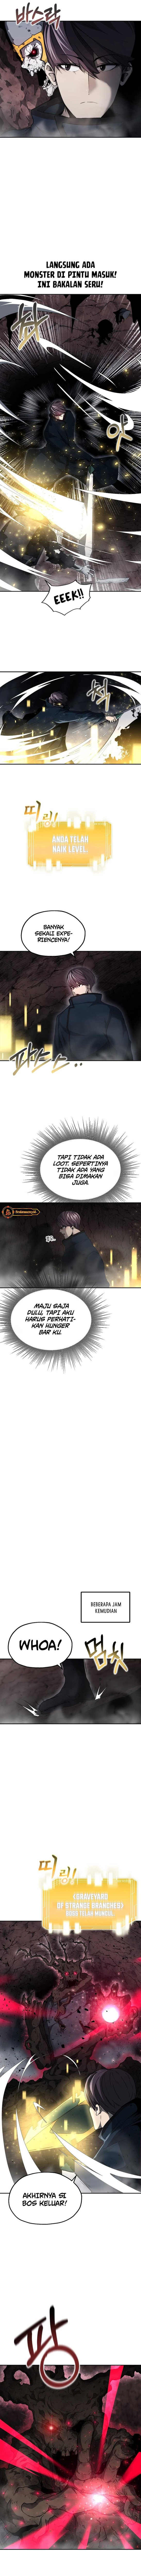 Solo Eating to Overpowered Chapter 06